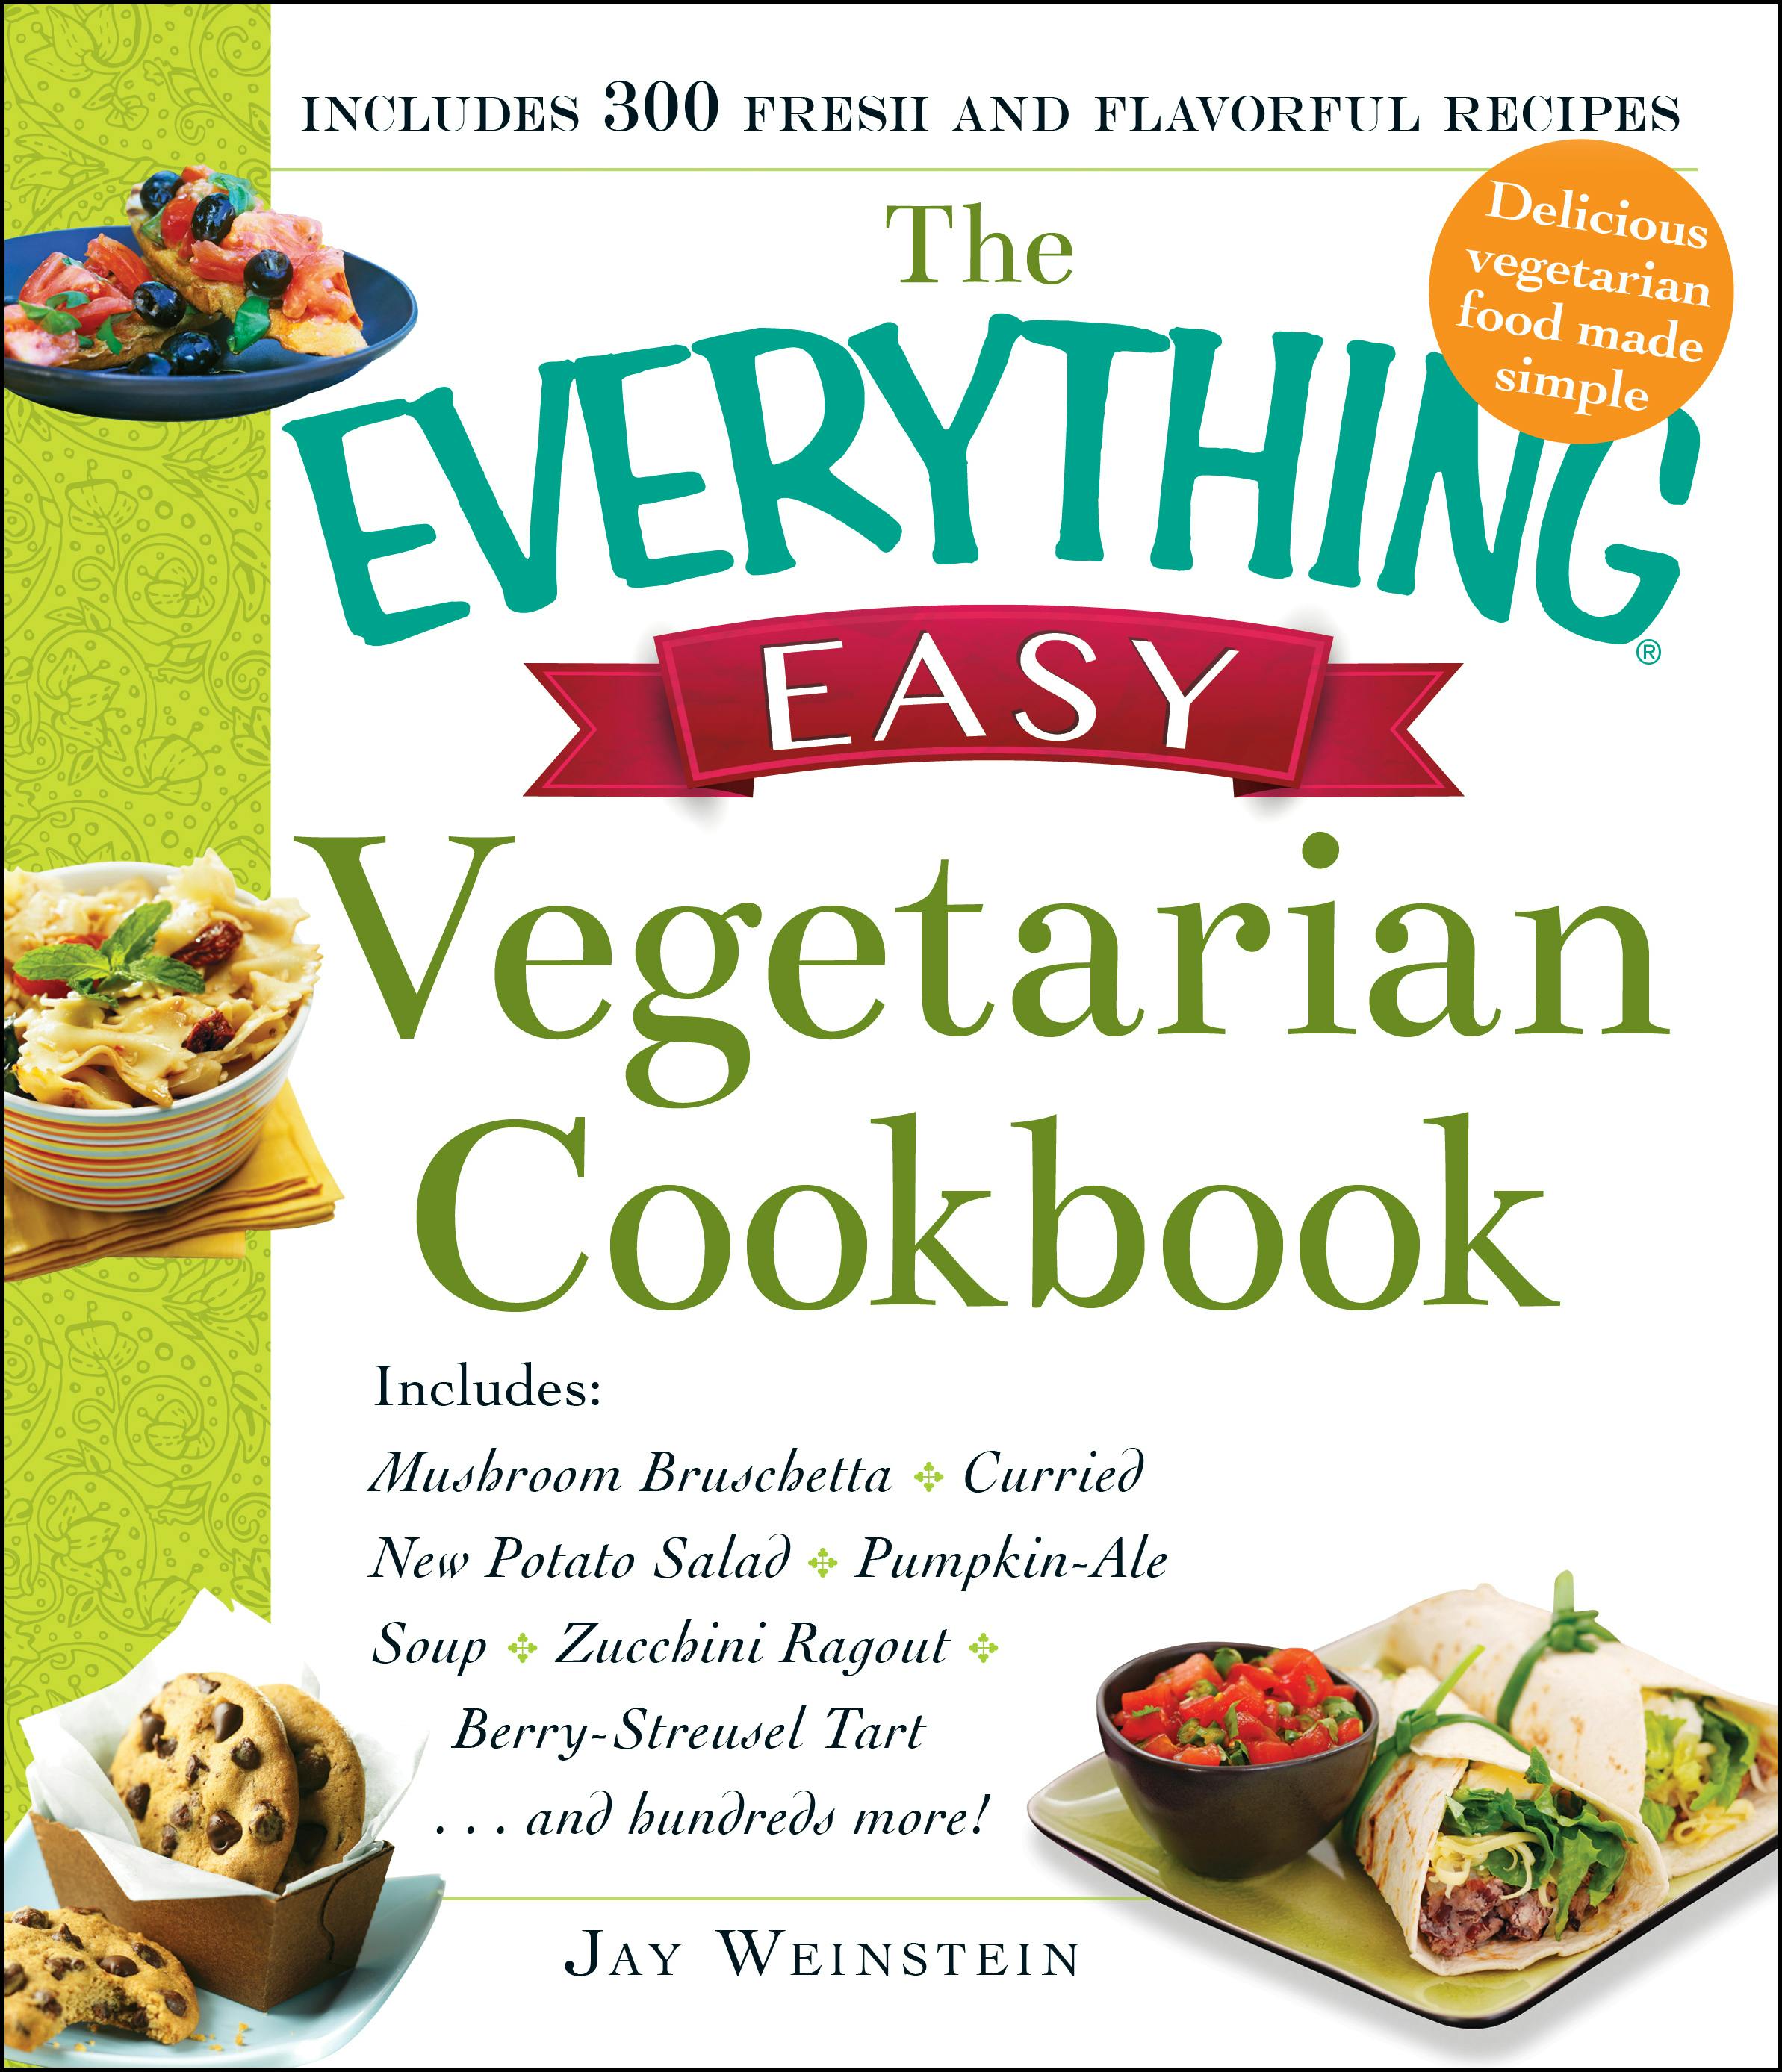 The Everything Easy Vegetarian Cookbook: Includes Mushroom Bruschetta, Curried New Potato Salad, Pumpkin-Ale Soup, Zucchini Ragout, Berry-Streusel Tart...and Hundreds More! - undefined